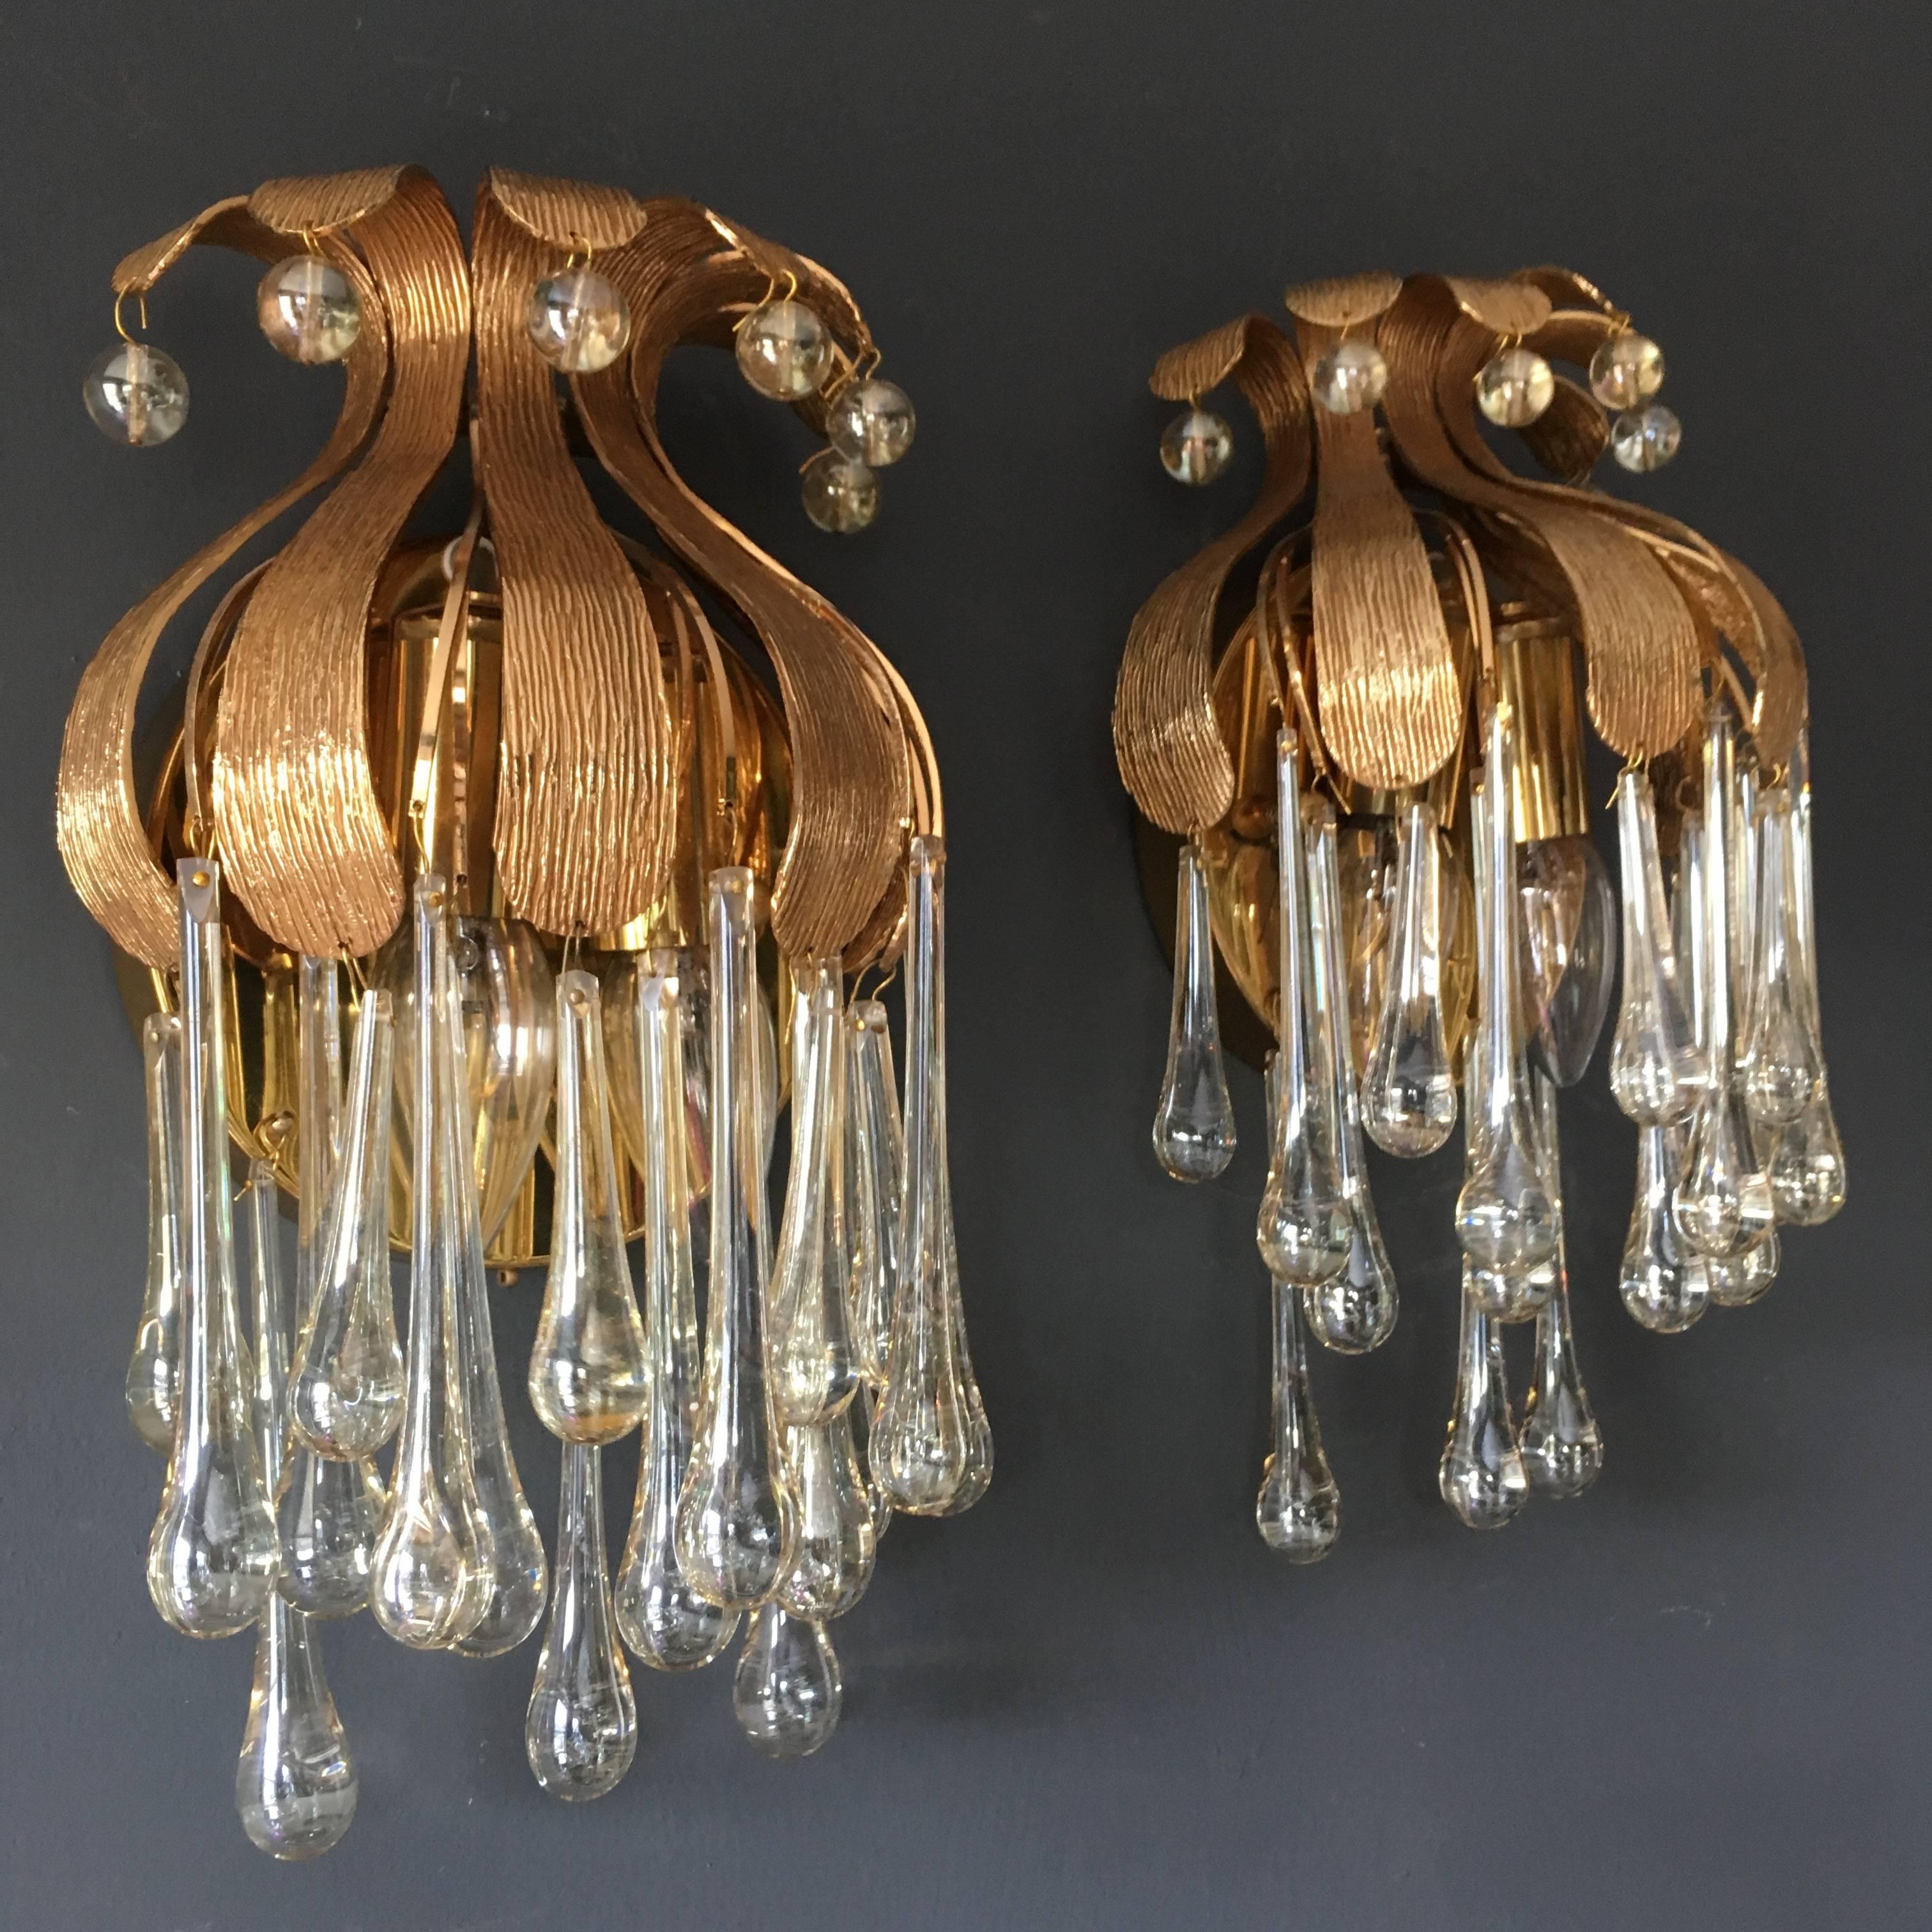 Two beautiful gold-plated brass wall sconces by Palwa, Germany, circa 1970s.

They are decorated with Murano glass teardrop crystals all around and small Murano glass spheres around the top 

Measures: Height 34 cm
Width 20 cm
Depth 14